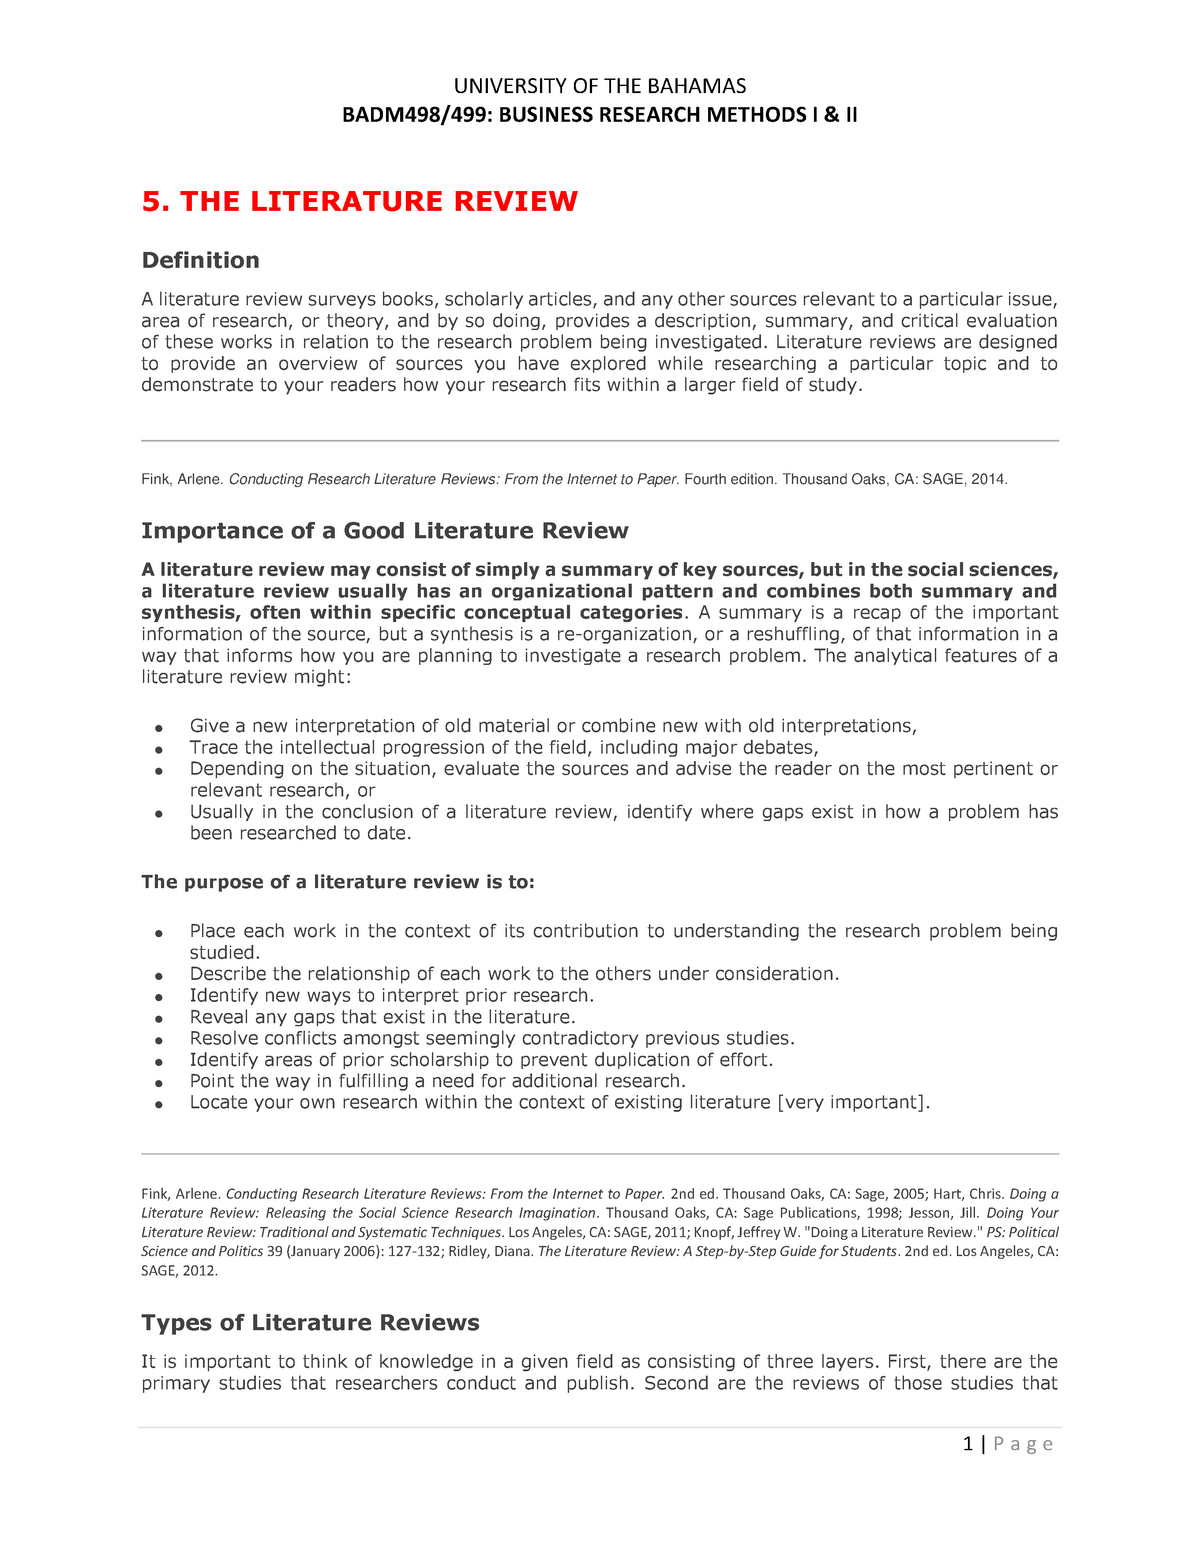 example of methods section in literature review